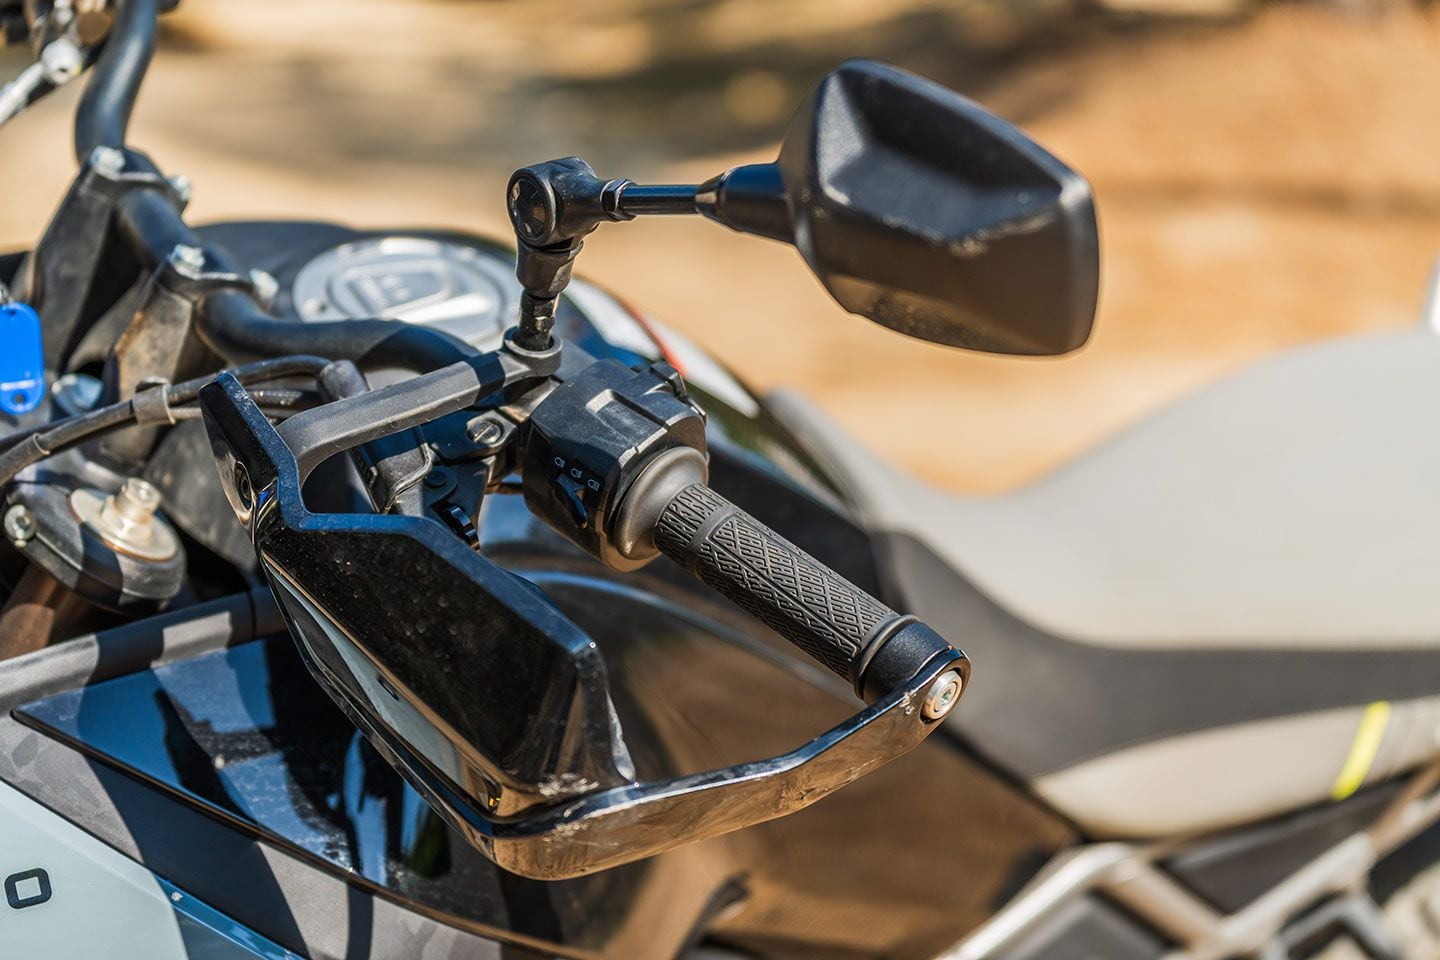 Mirrors fold at the elbow so that they can be positioned out of the way when standing up over the front of the bike.